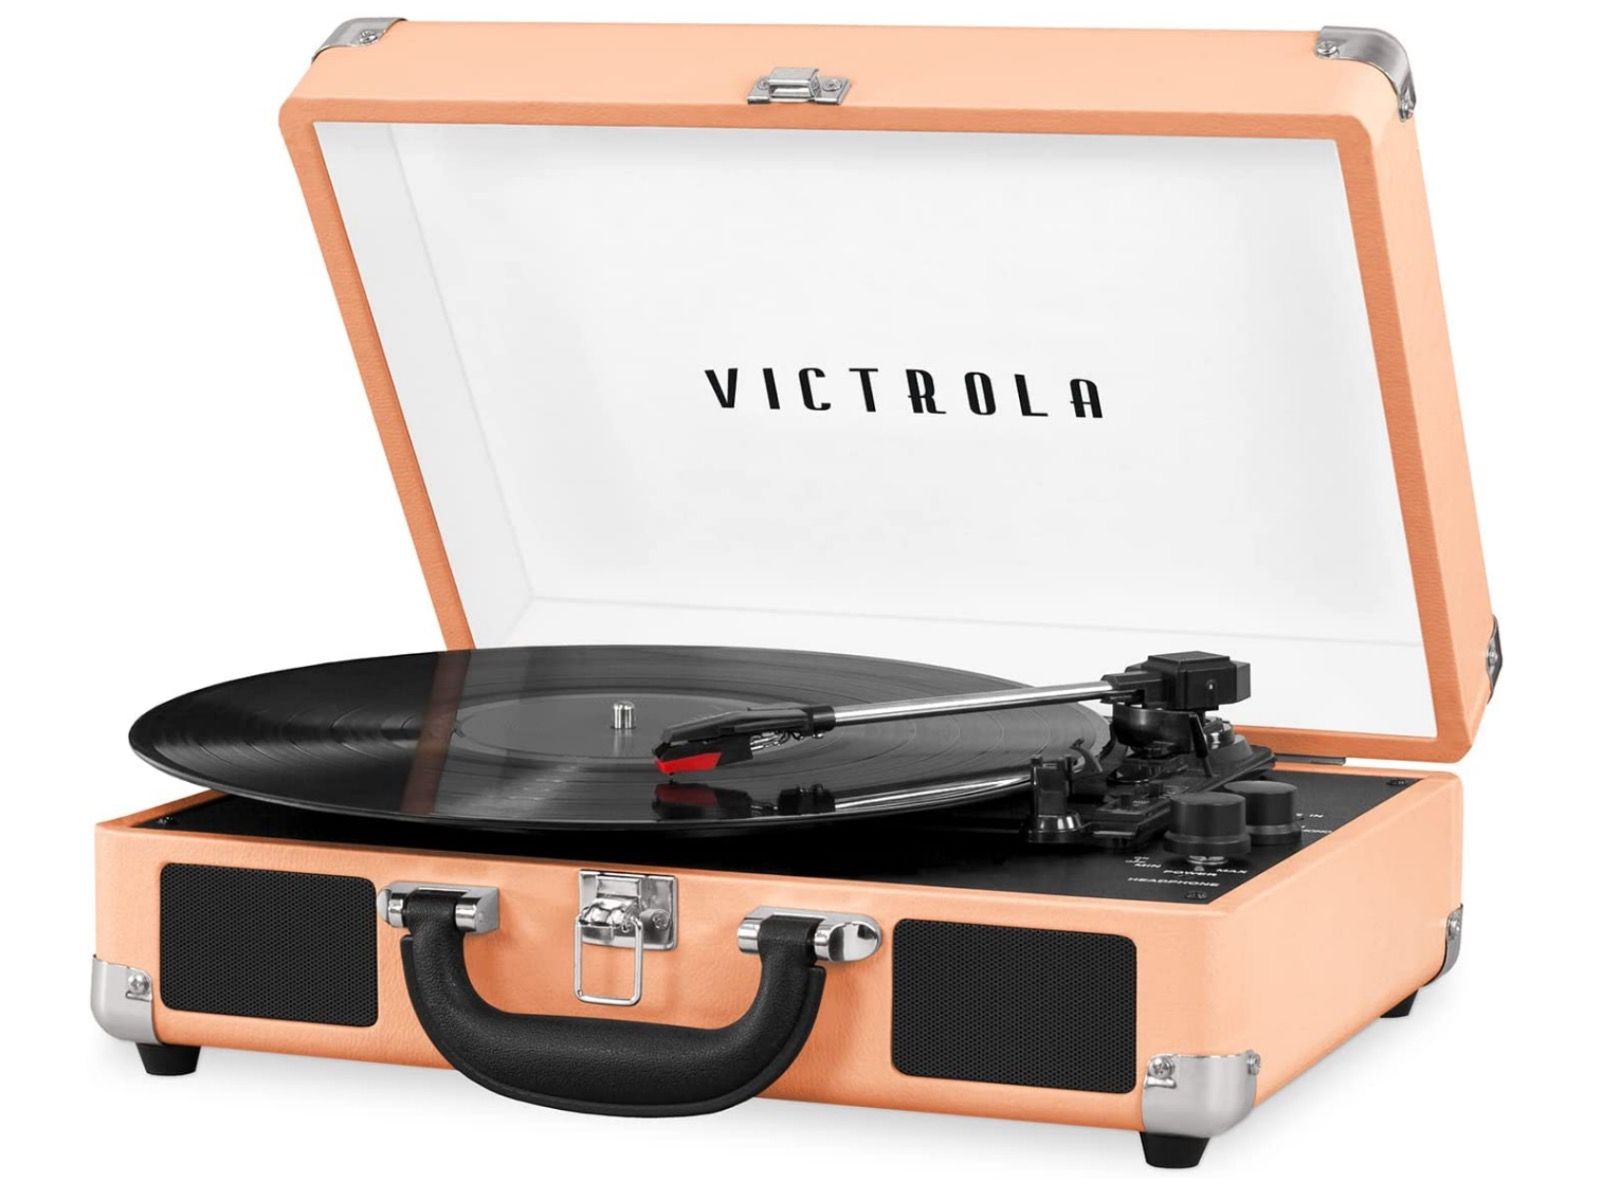 Peach colored Victrola Suitcase record player playing record